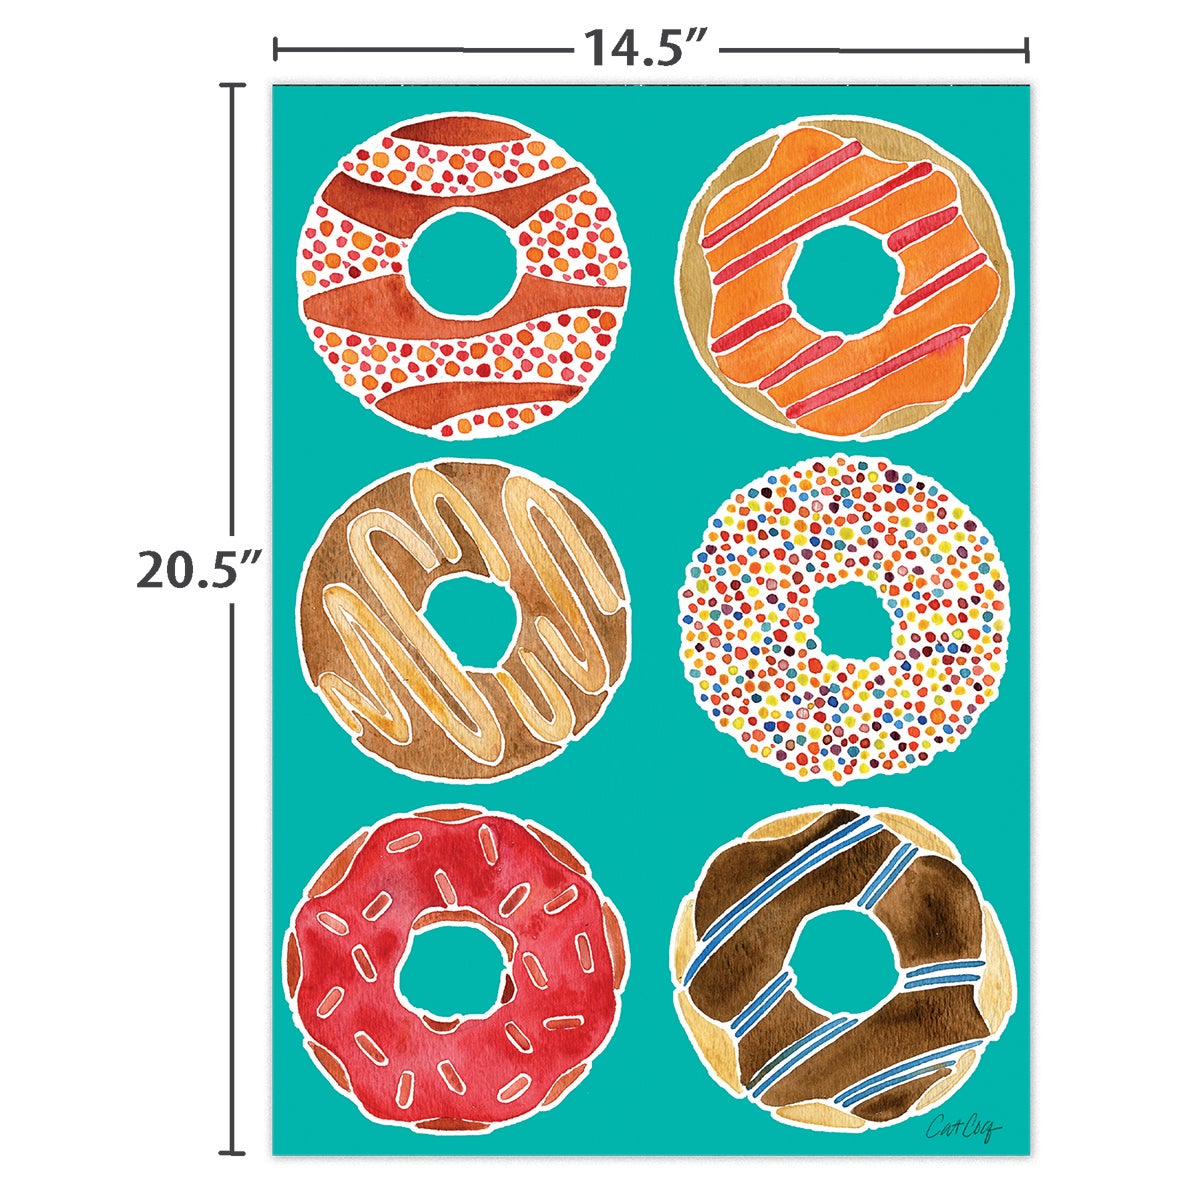 300pc Jigsaw Puzzle by Lang for sale online Donuts 